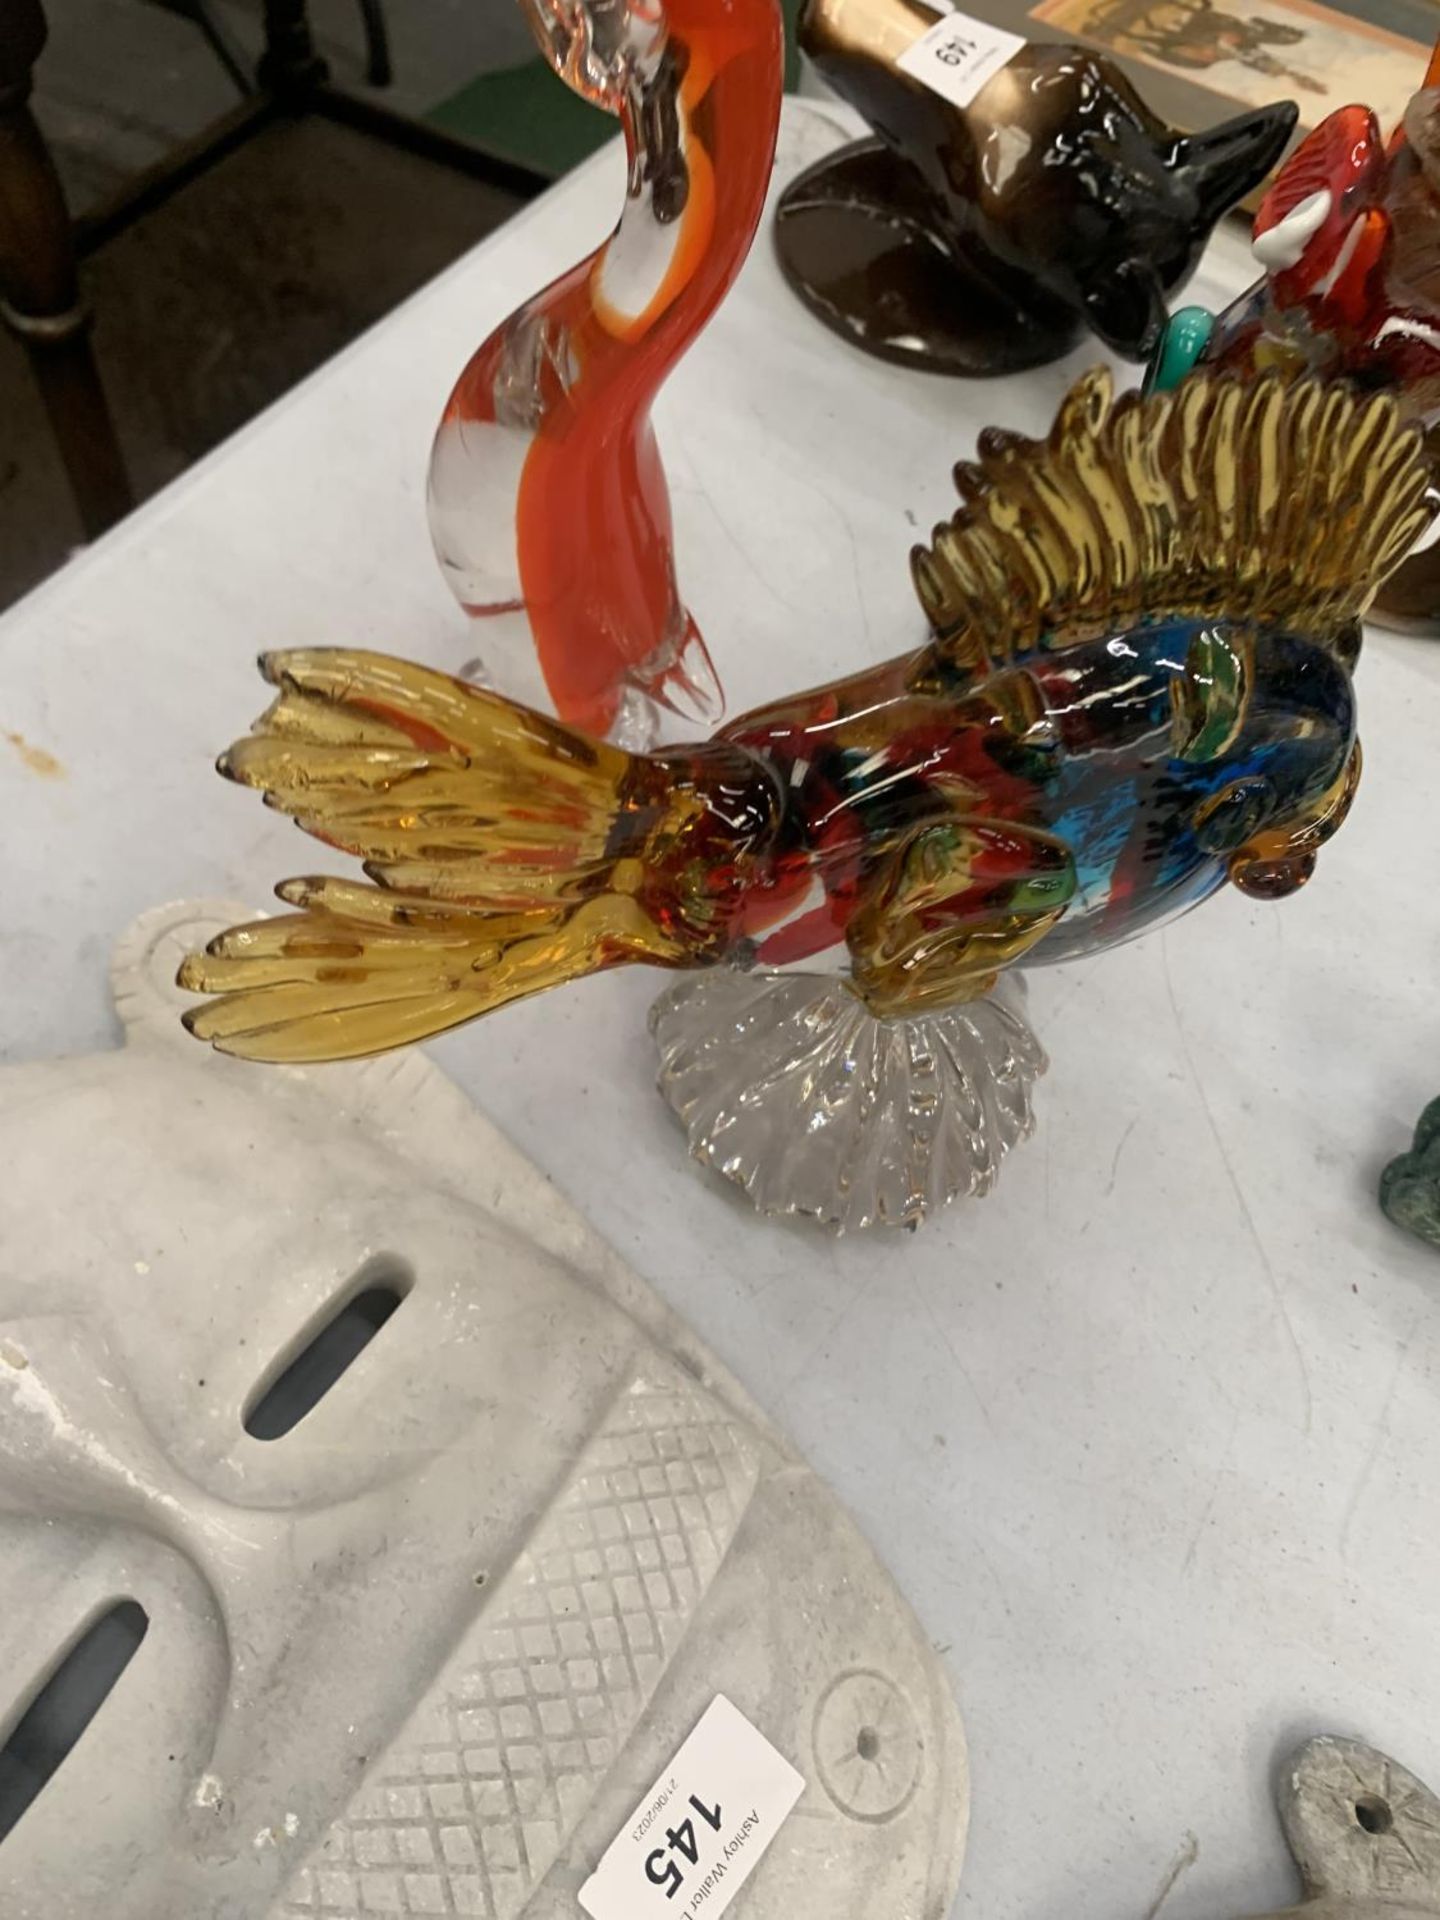 THREE MURANO GLASS FIGURES TO INCLUDE A CLOWN, FISH AND A COCKEREL - Image 5 of 5